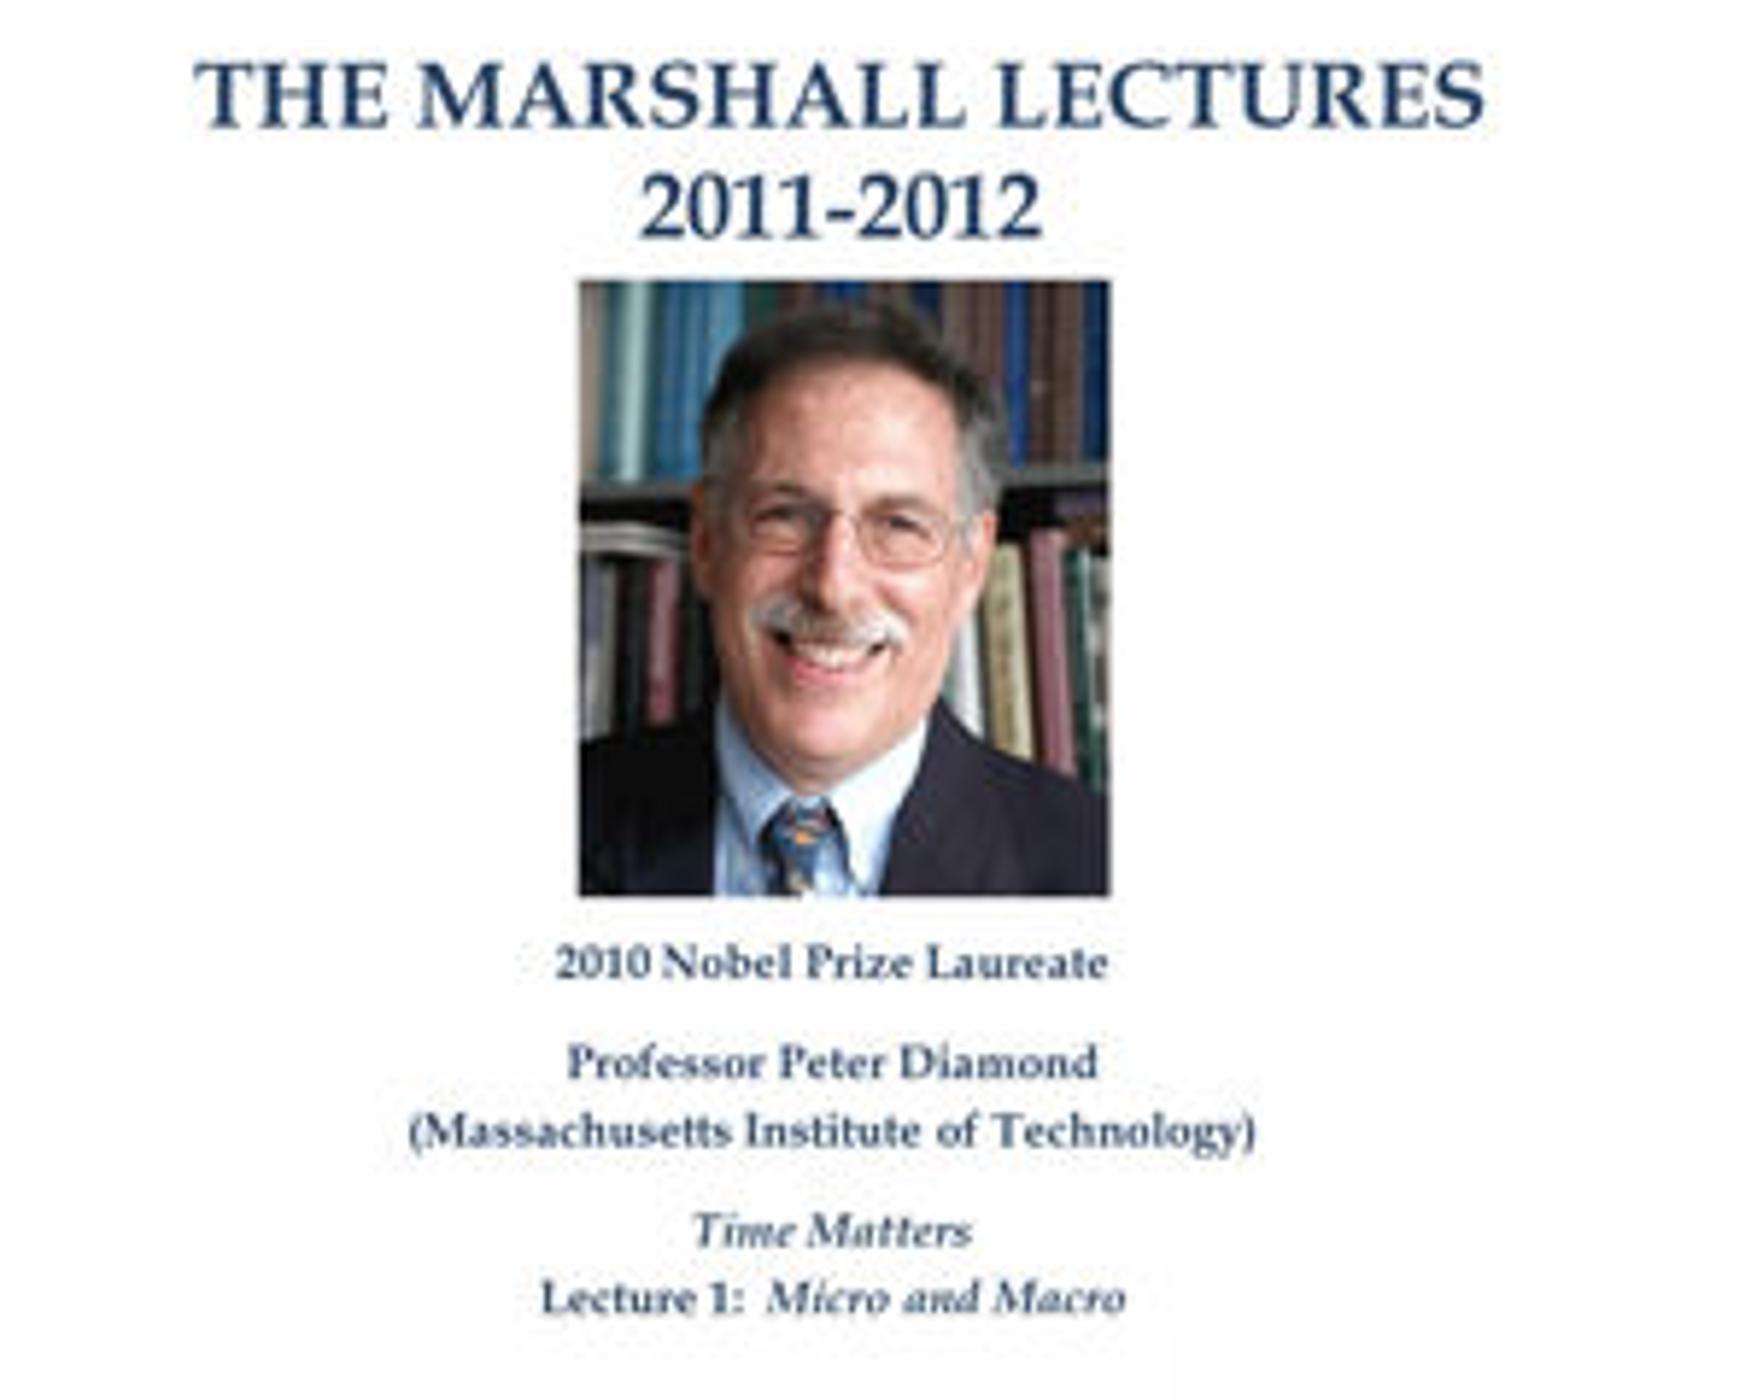 Marshall Lecture 2011-2012 - Professor Peter Diamond - Time Matters - Lecture 1 - Micro and Macro